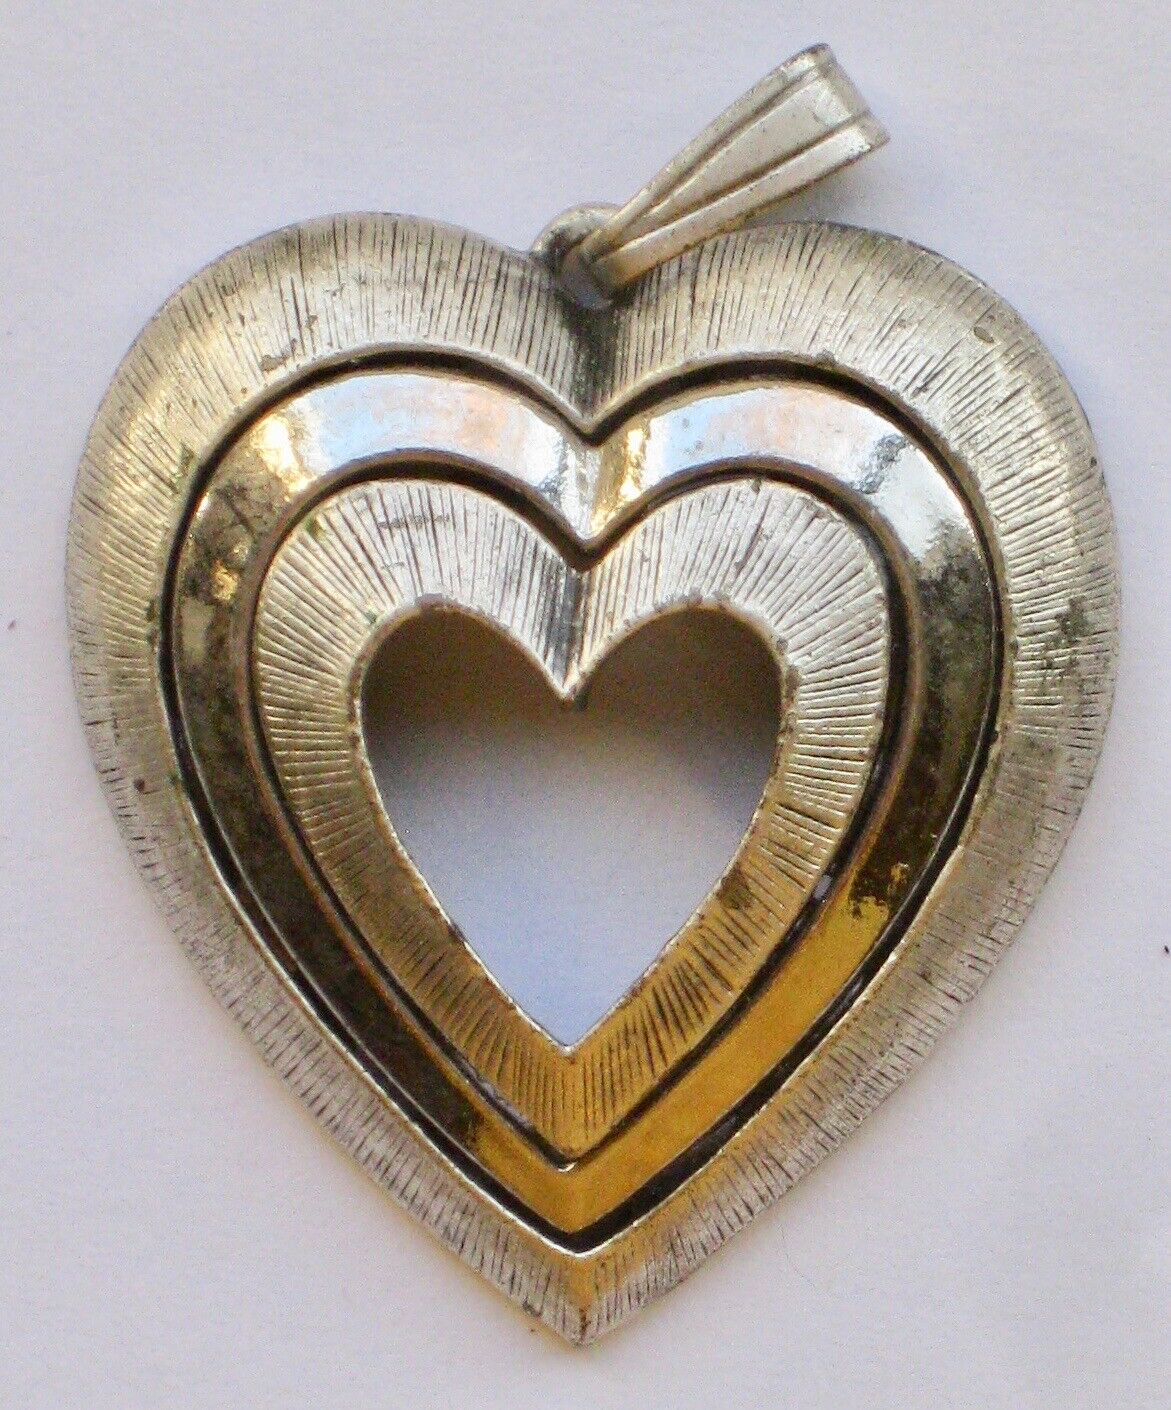 Popular brand in the world very old silver pendant in heart shape latest a of the